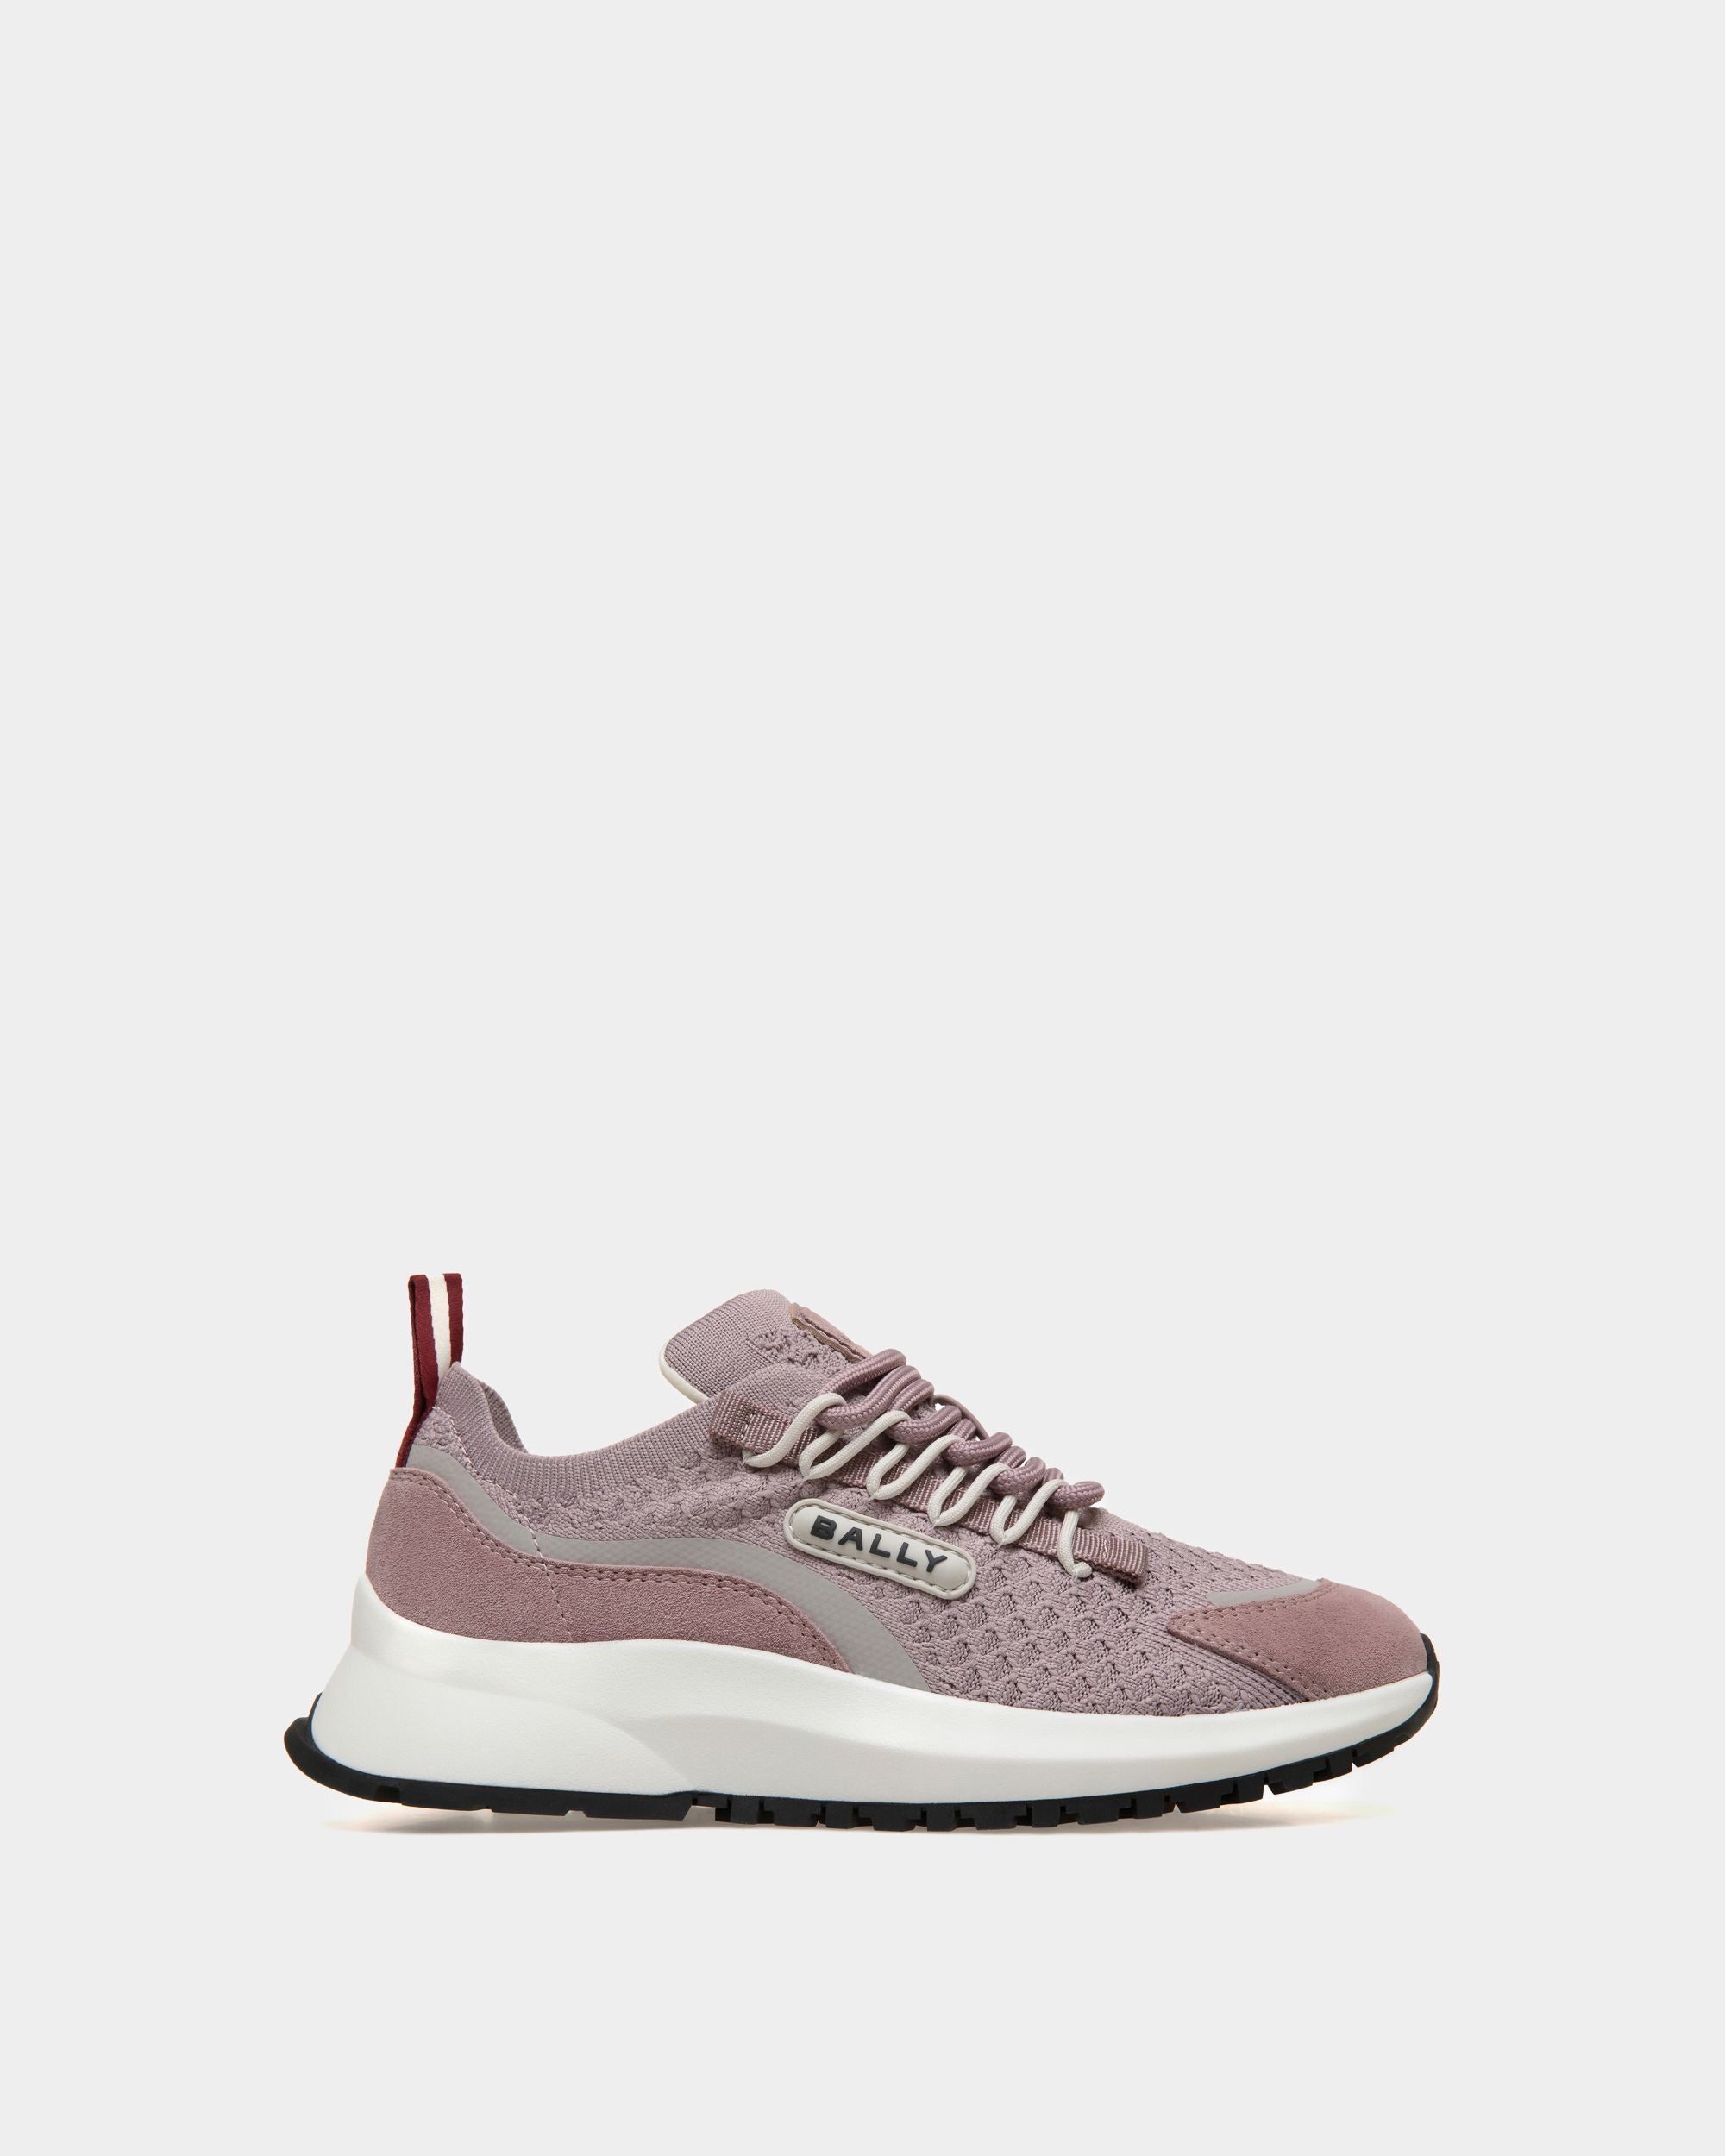 Outline | Women's Low-top Sneaker in Lilac Knit Fabric | Bally | Still Life Side